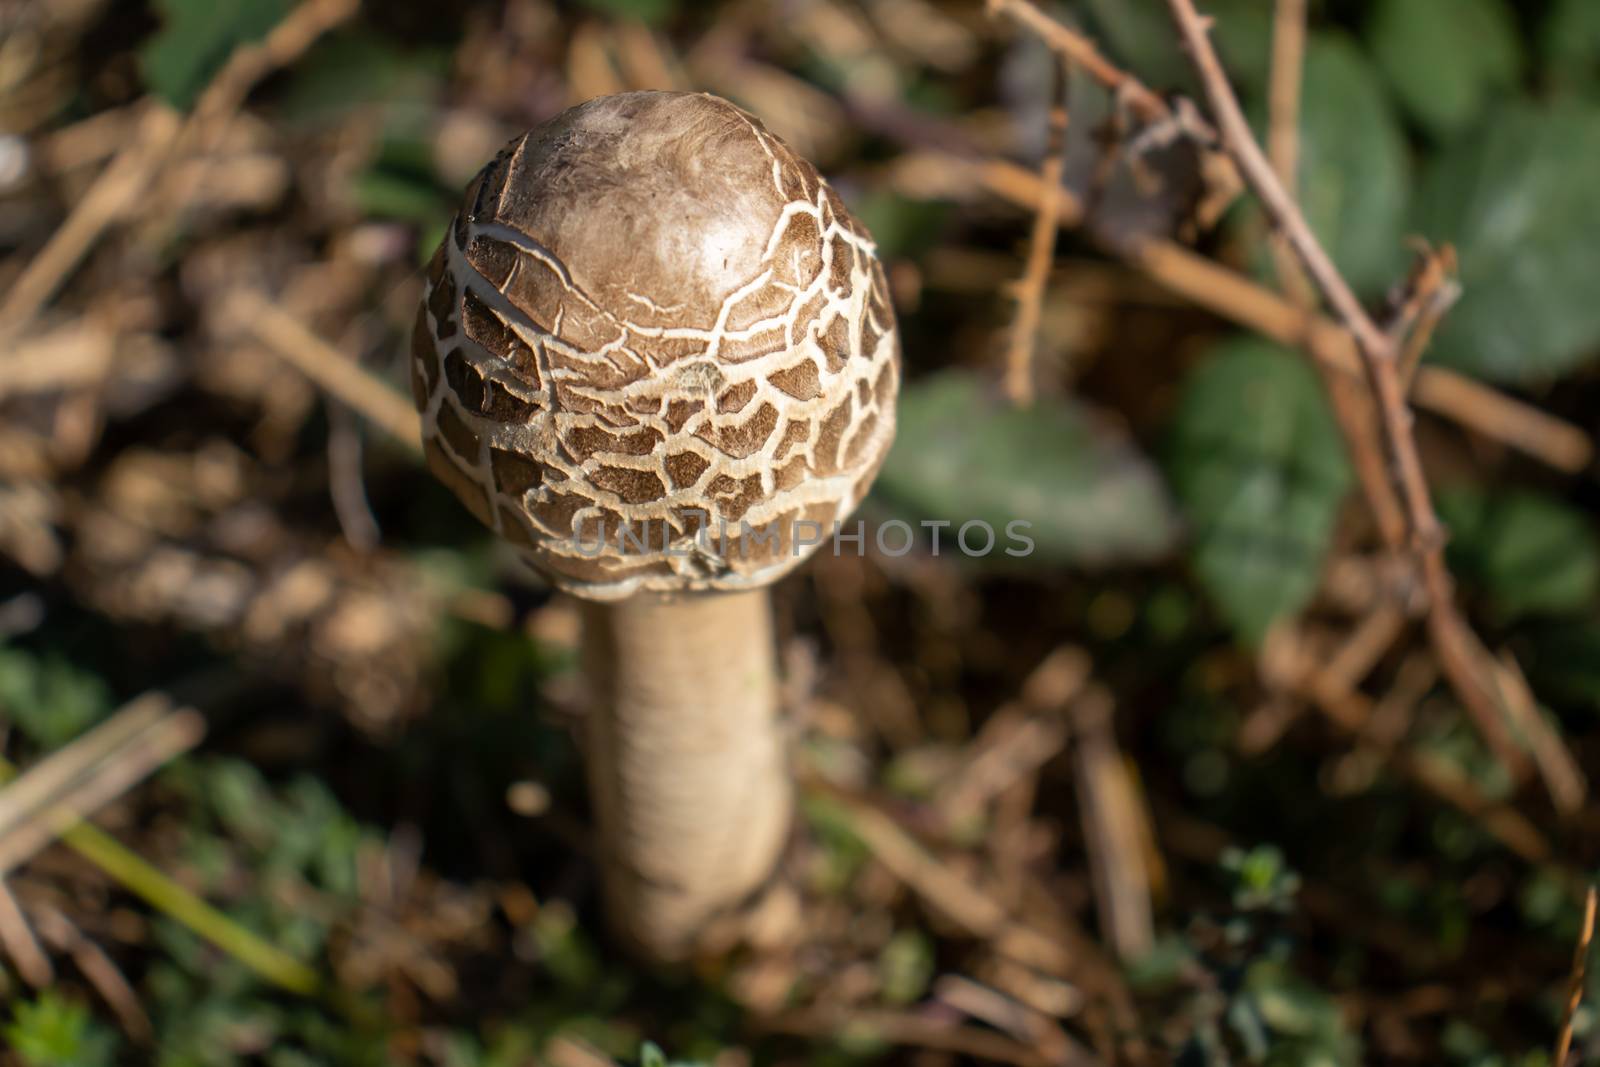 parasol mushroom on the ground in the forest close up. Macrolepiota procera